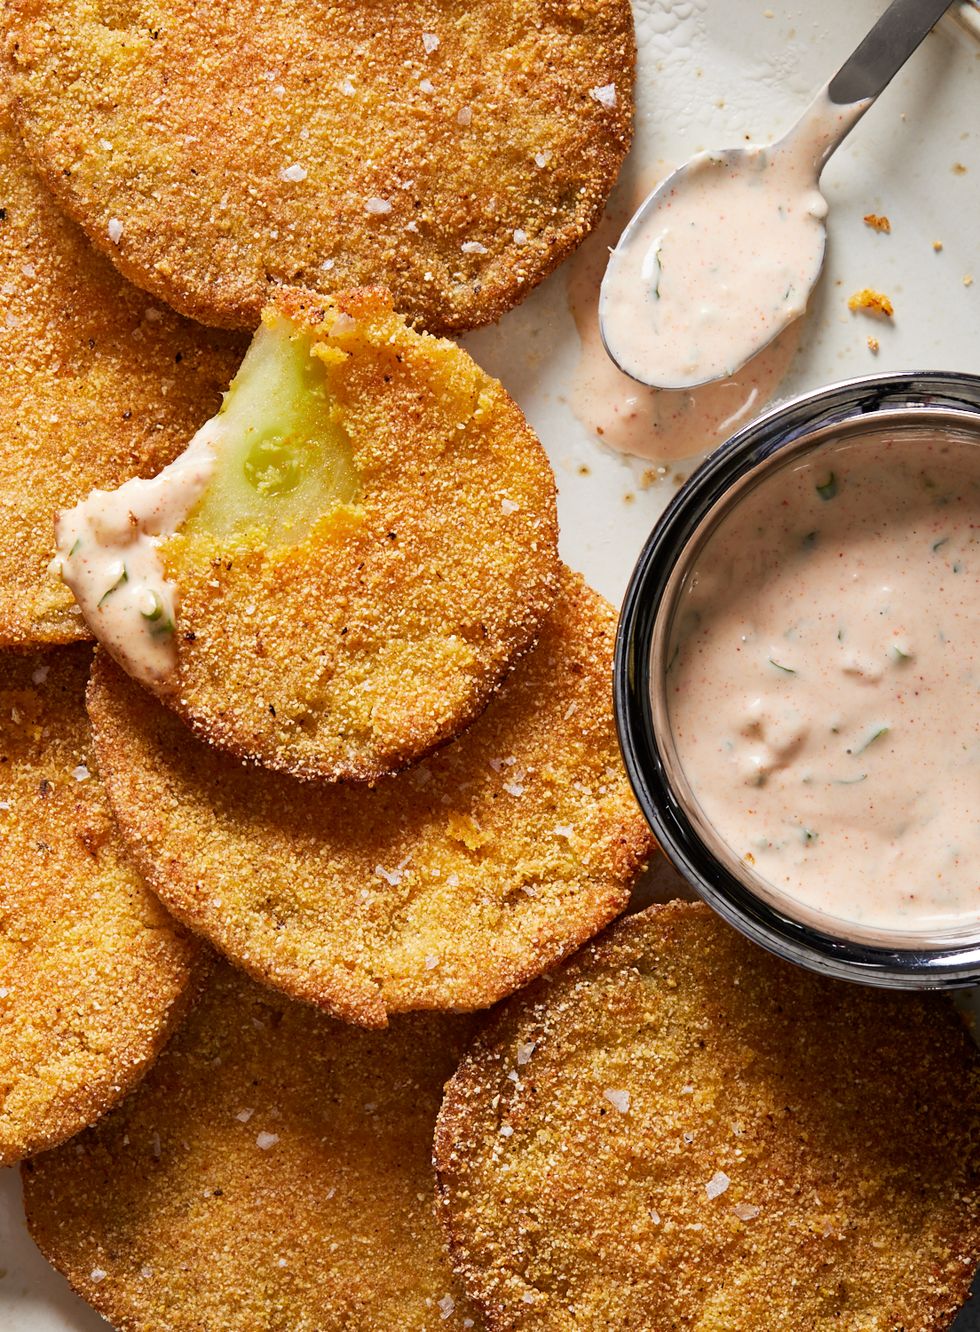 Best Fried Green Tomato Recipe - How To Make Fried Green Tomatoes